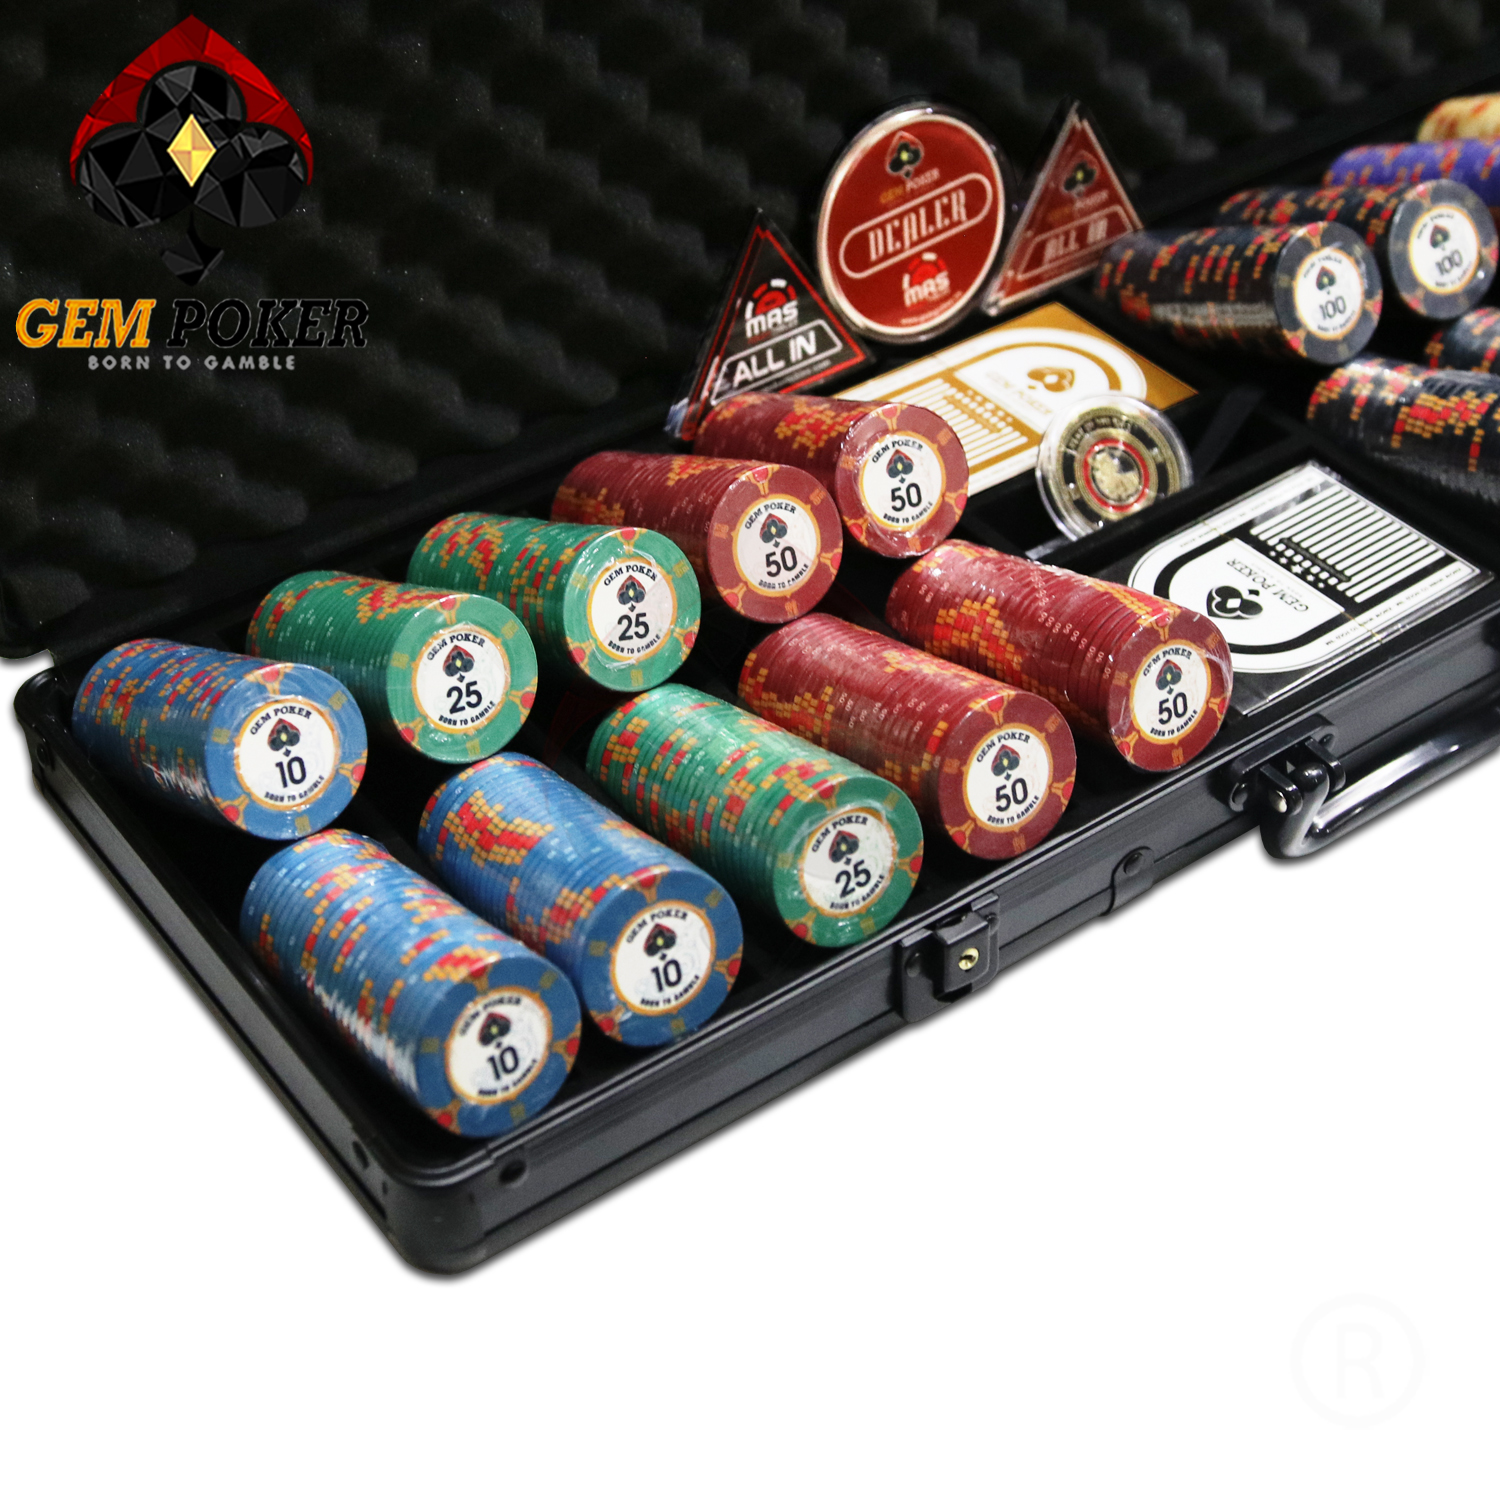 VALI 500 CHIP POKER SỨ CERAMIC YEAR OF THE OX